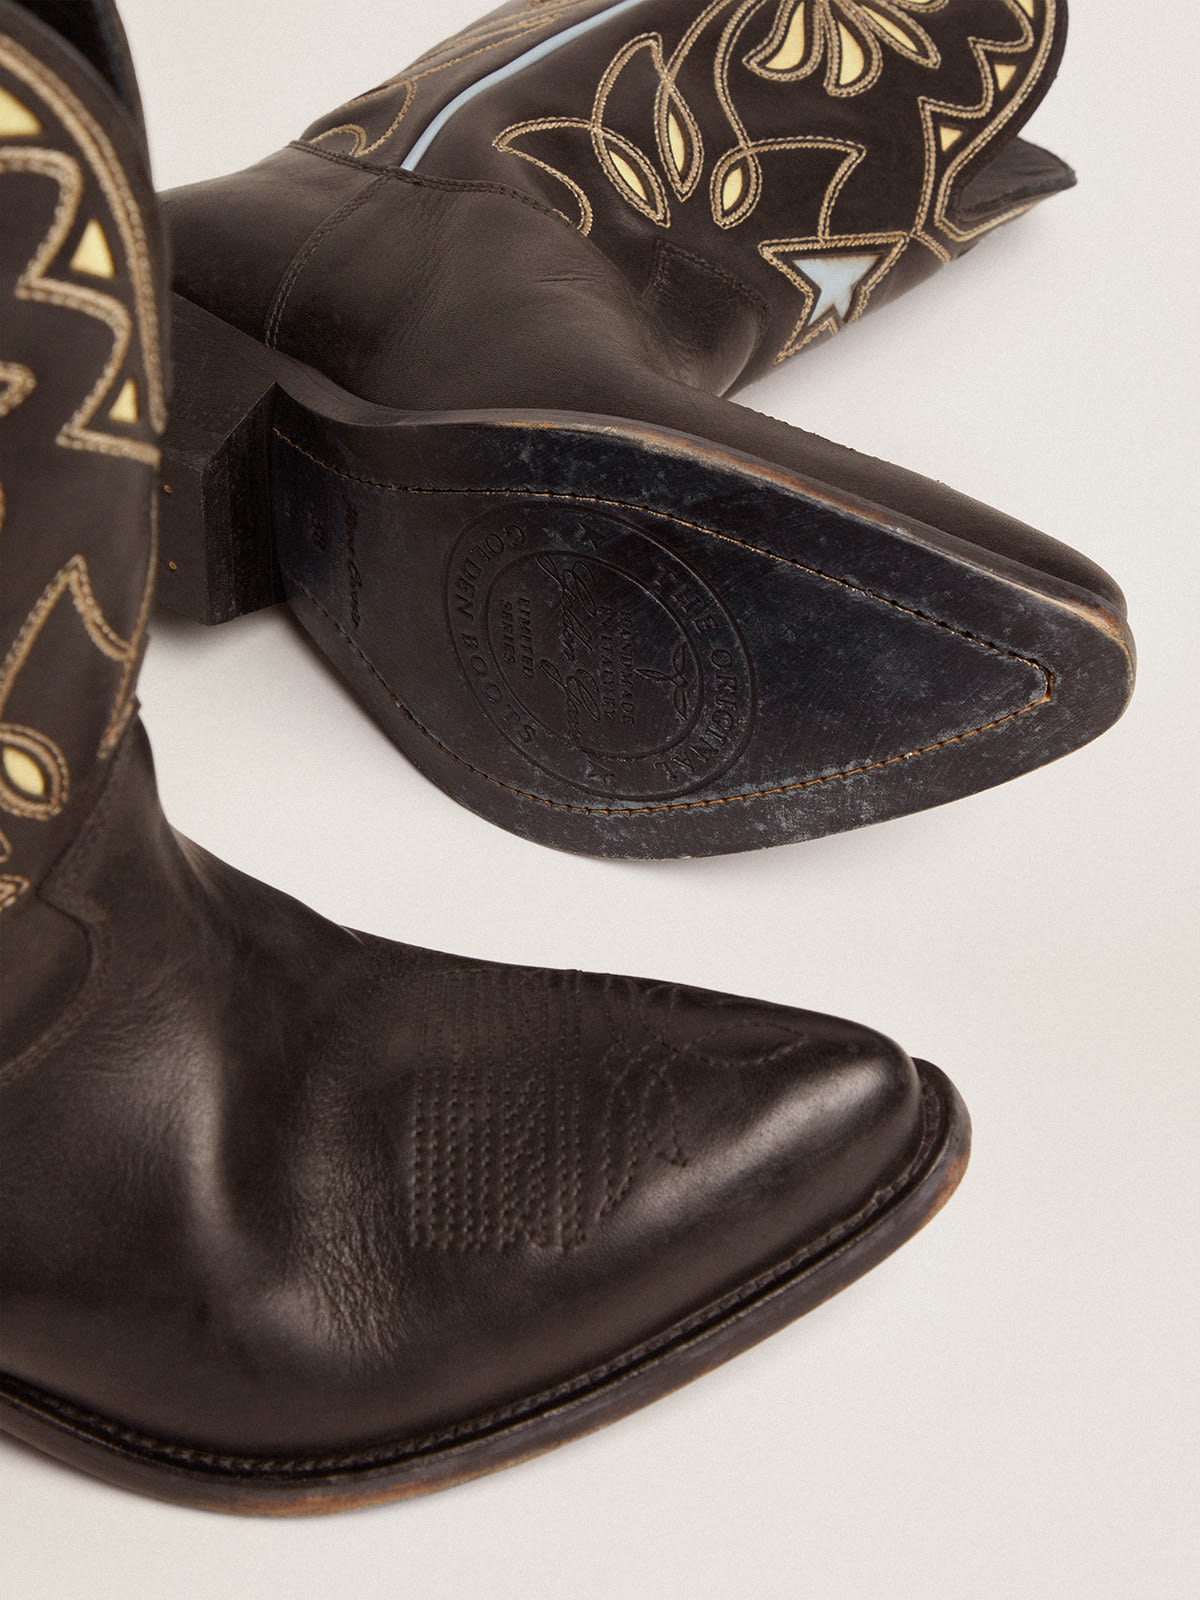 Golden Goose - Women's Wish Star low boots in black leather with yellow details in 